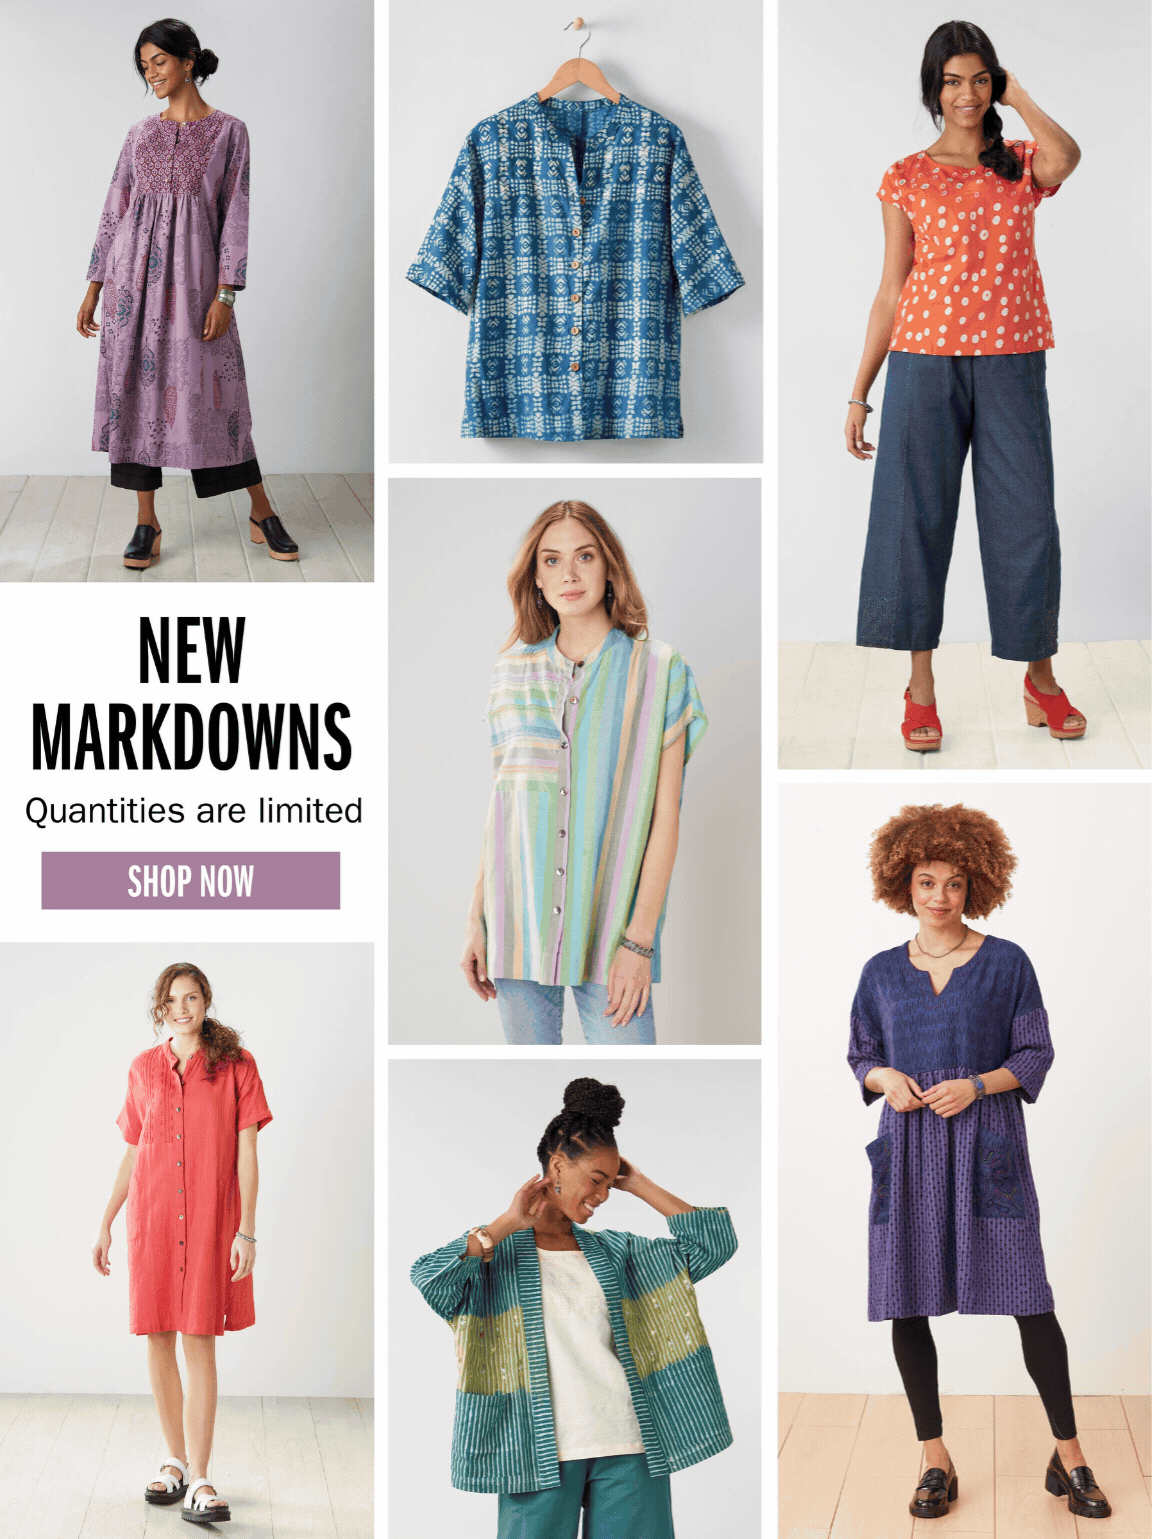 NEW MARKDOWNS Quantities are limited SHOP NOW